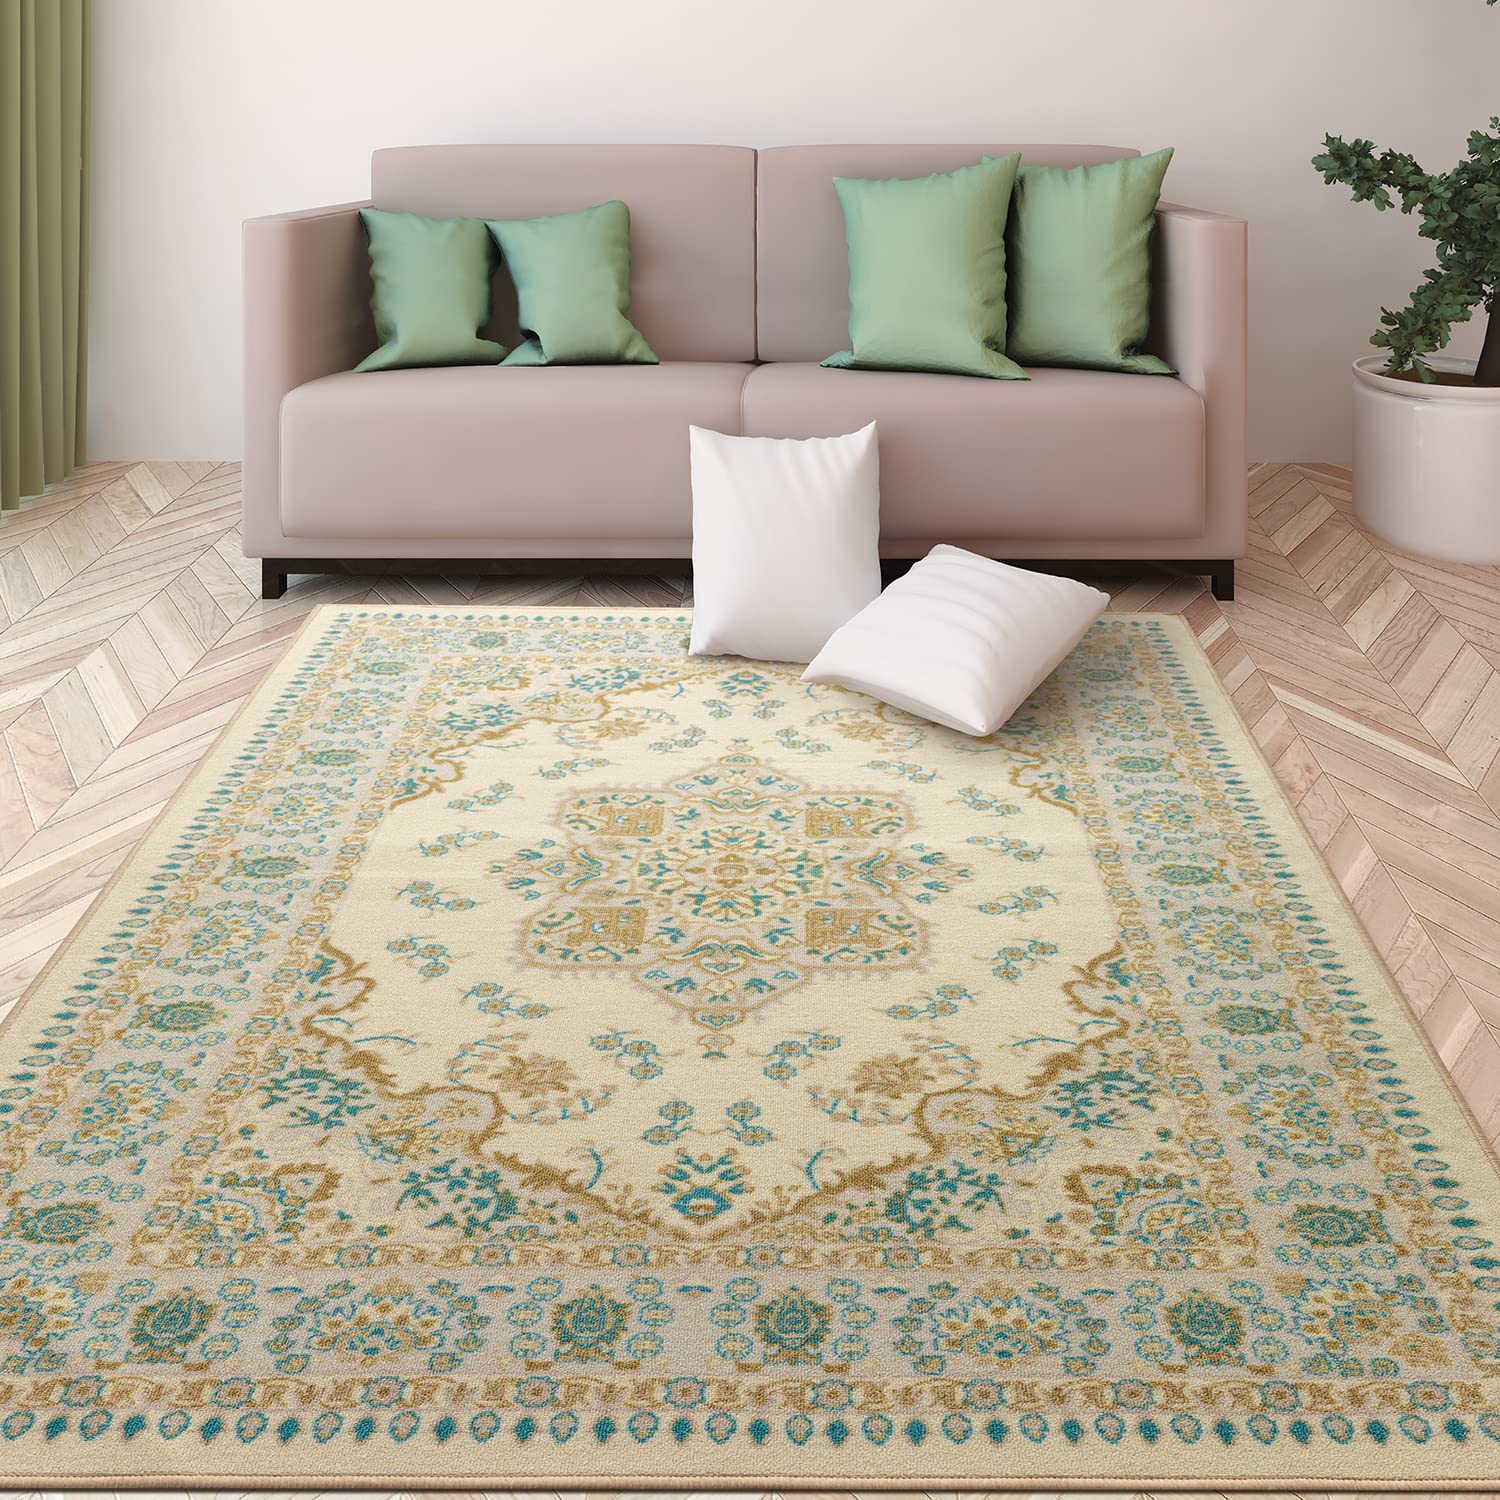 Antep Rugs Alfombras Oriental Traditional 3x5 Non-Skid (Non-Slip) Low Profile Pile Rubber Backing Indoor Area Rugs (Blue Beige, 